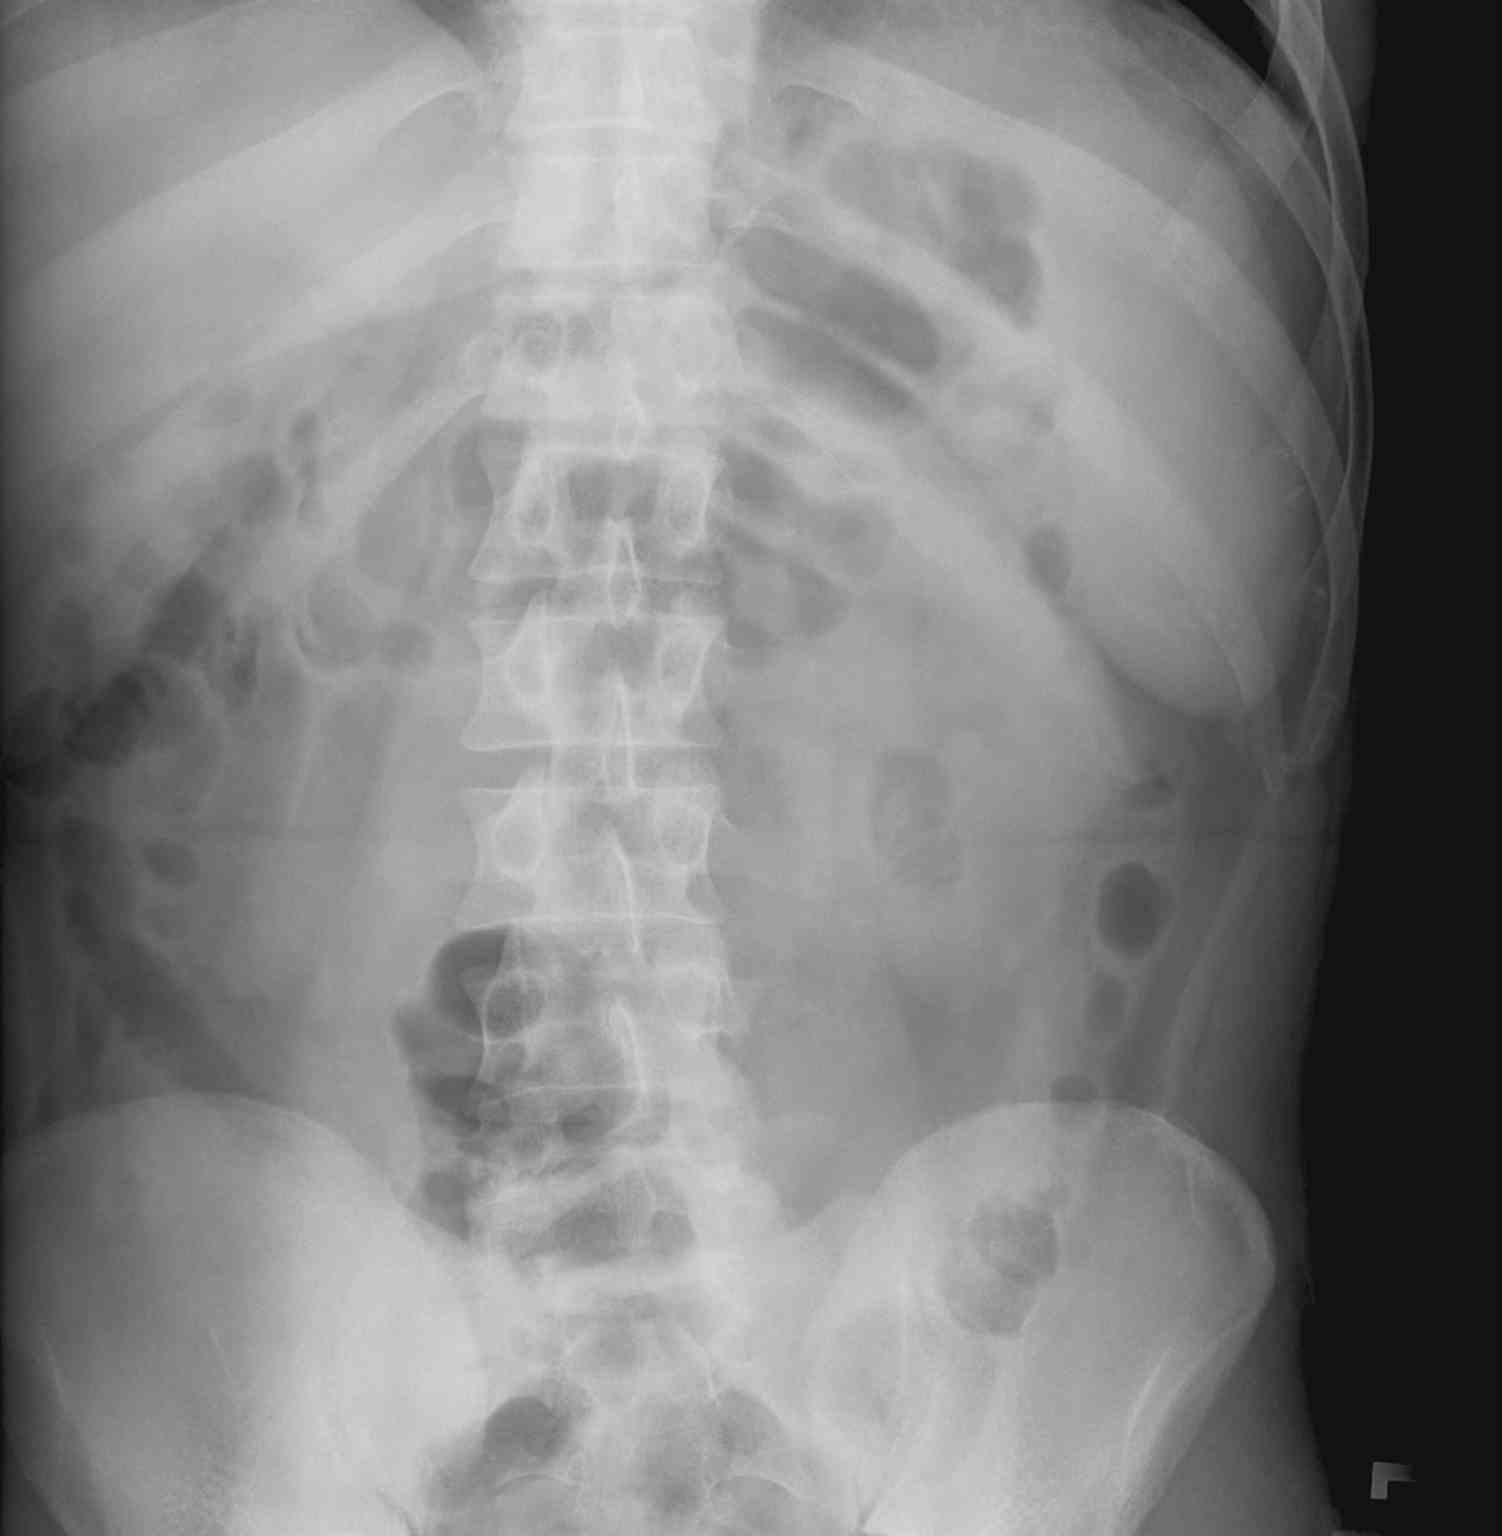 <p>Abdominal Radiograph of Splenomegaly. Splenomegaly is visualized on an abdominal x-ray.</p>